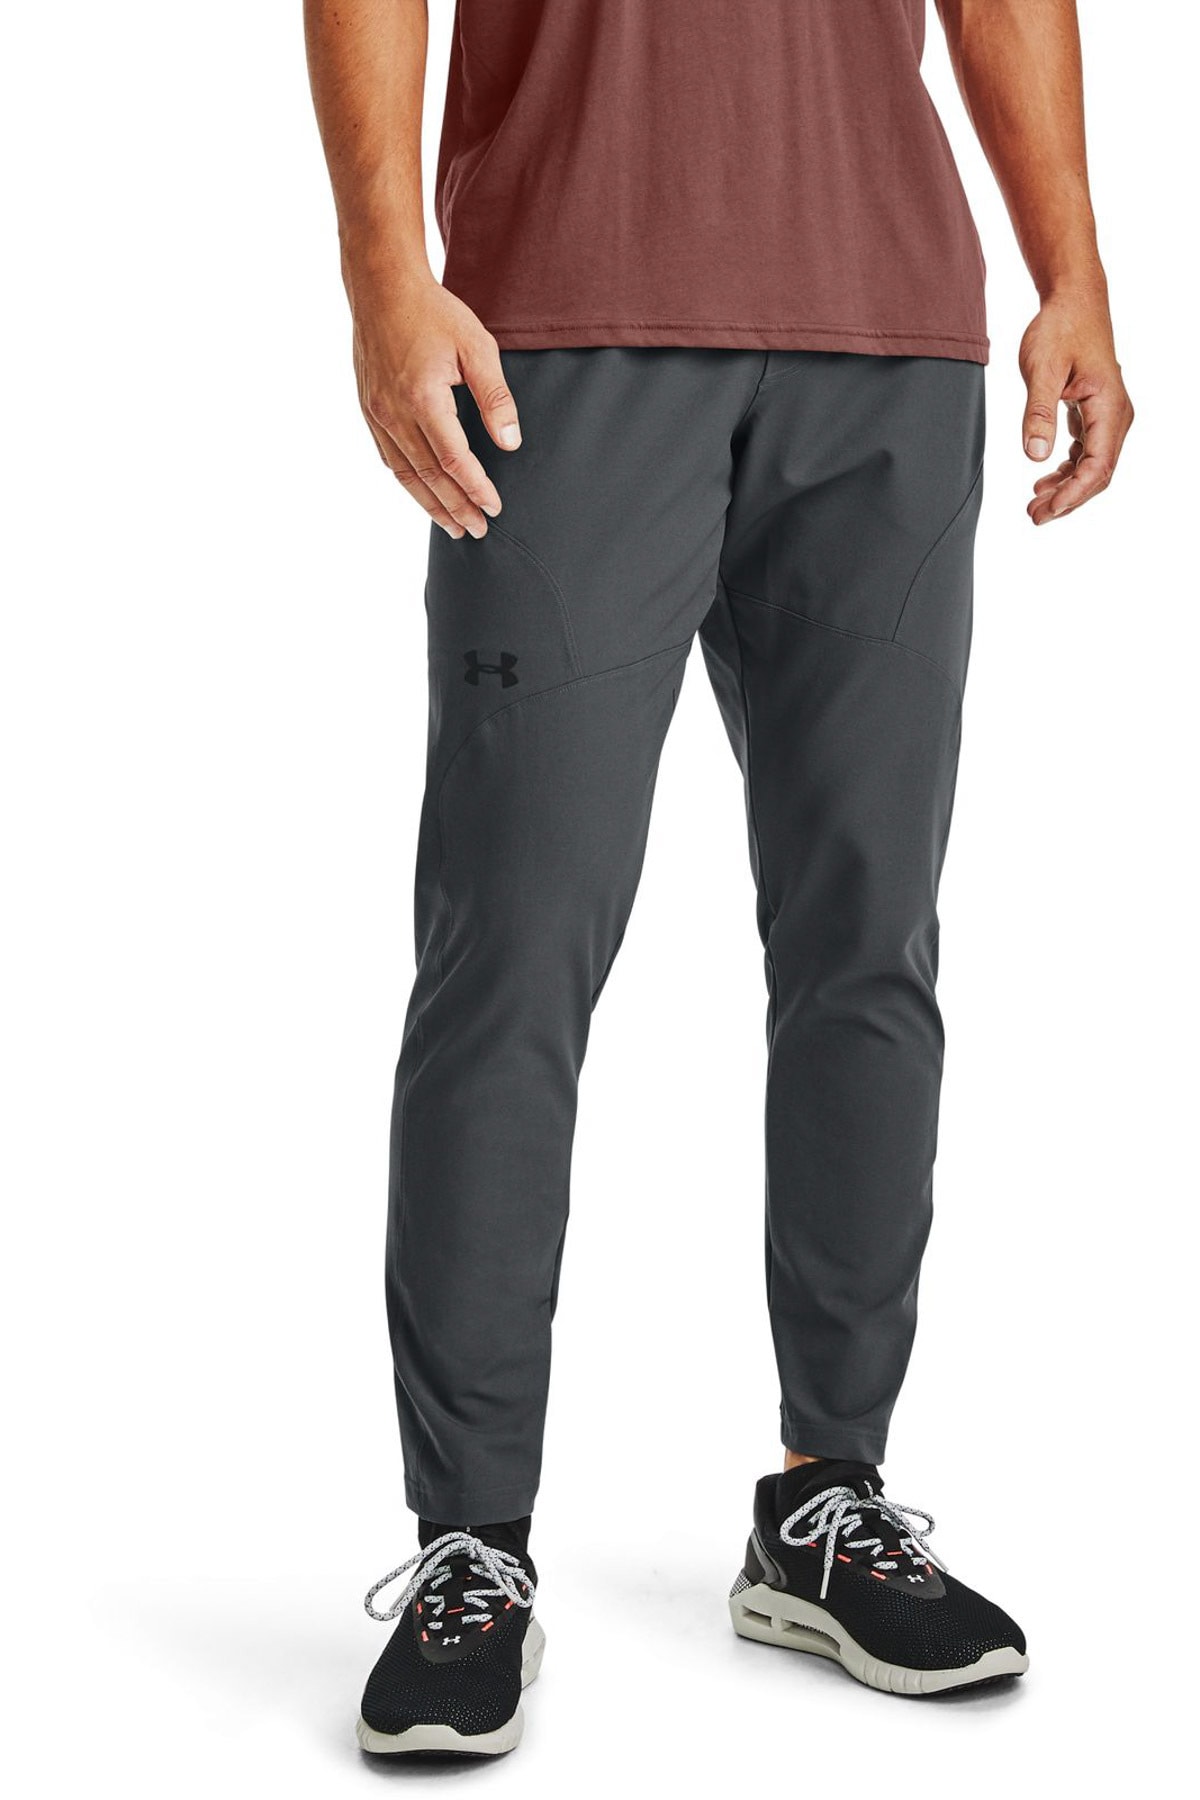 Under Armour Ua Unstoppable Tapered Pants 1352028-012